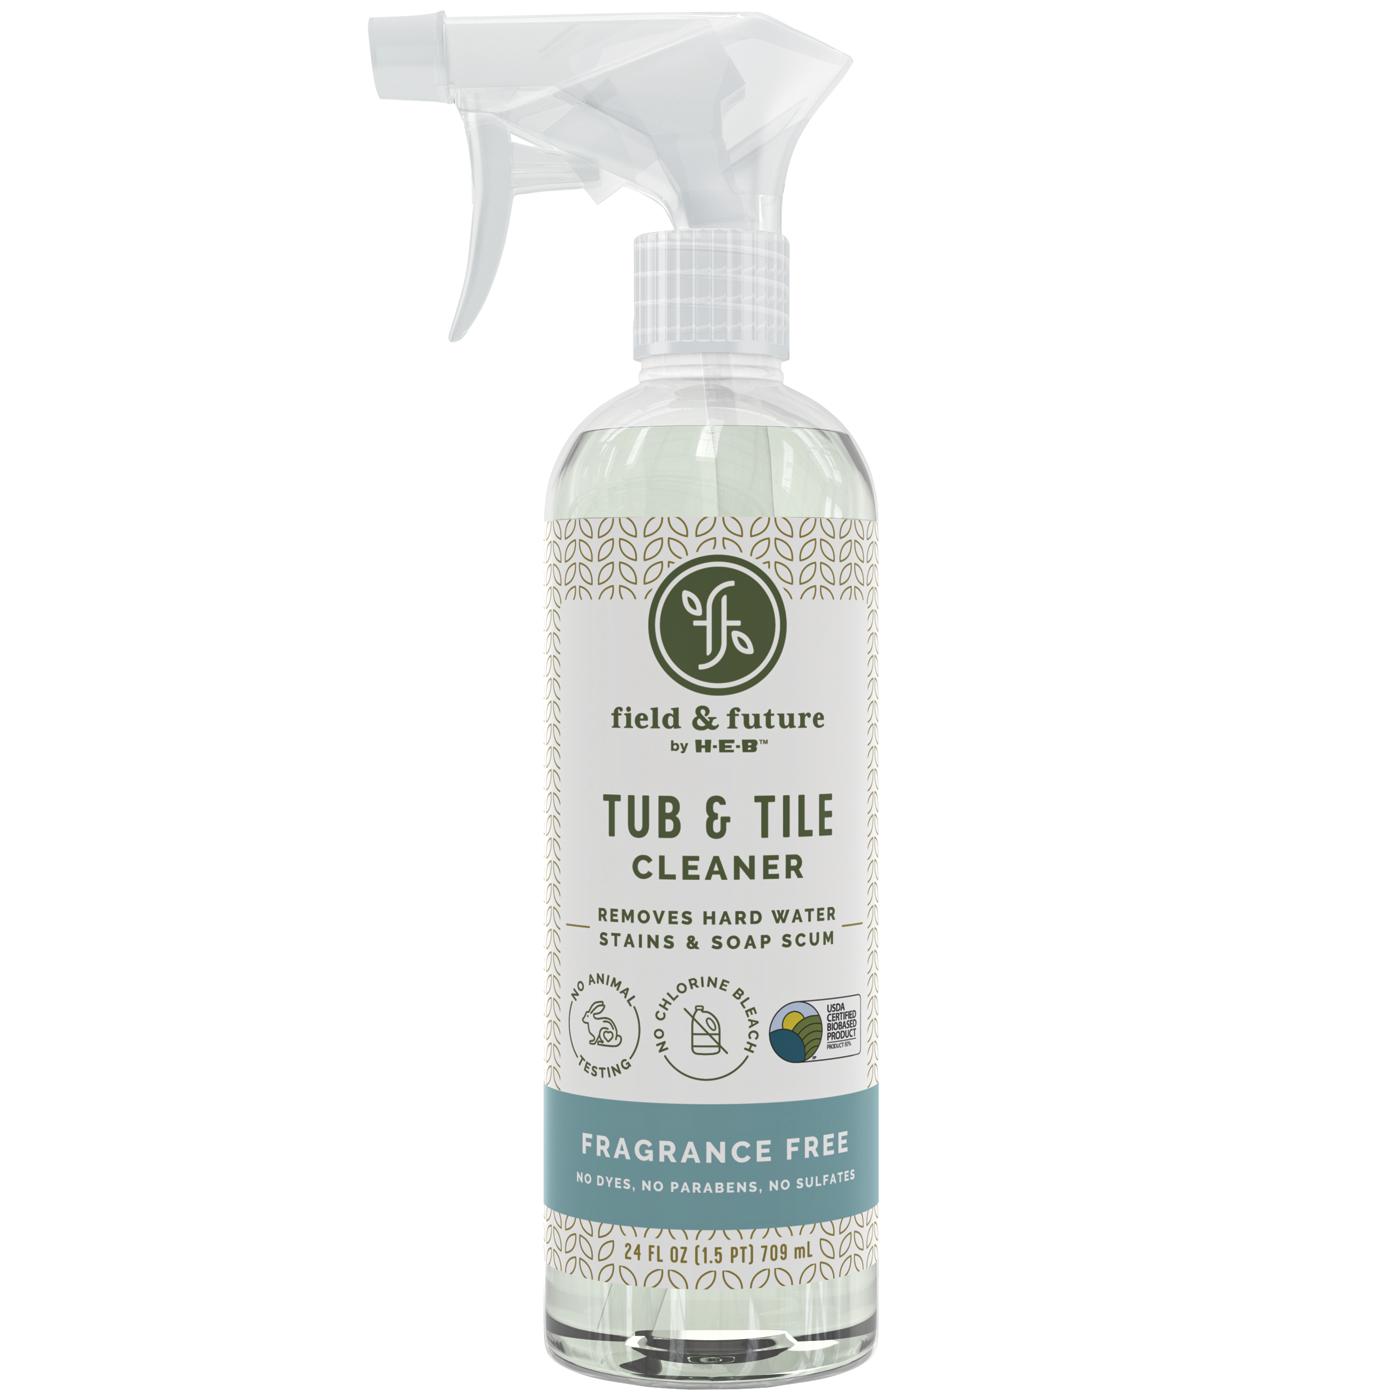 Field & Future by H-E-B Tub & Tile Cleaner - Fragrance Free; image 1 of 4